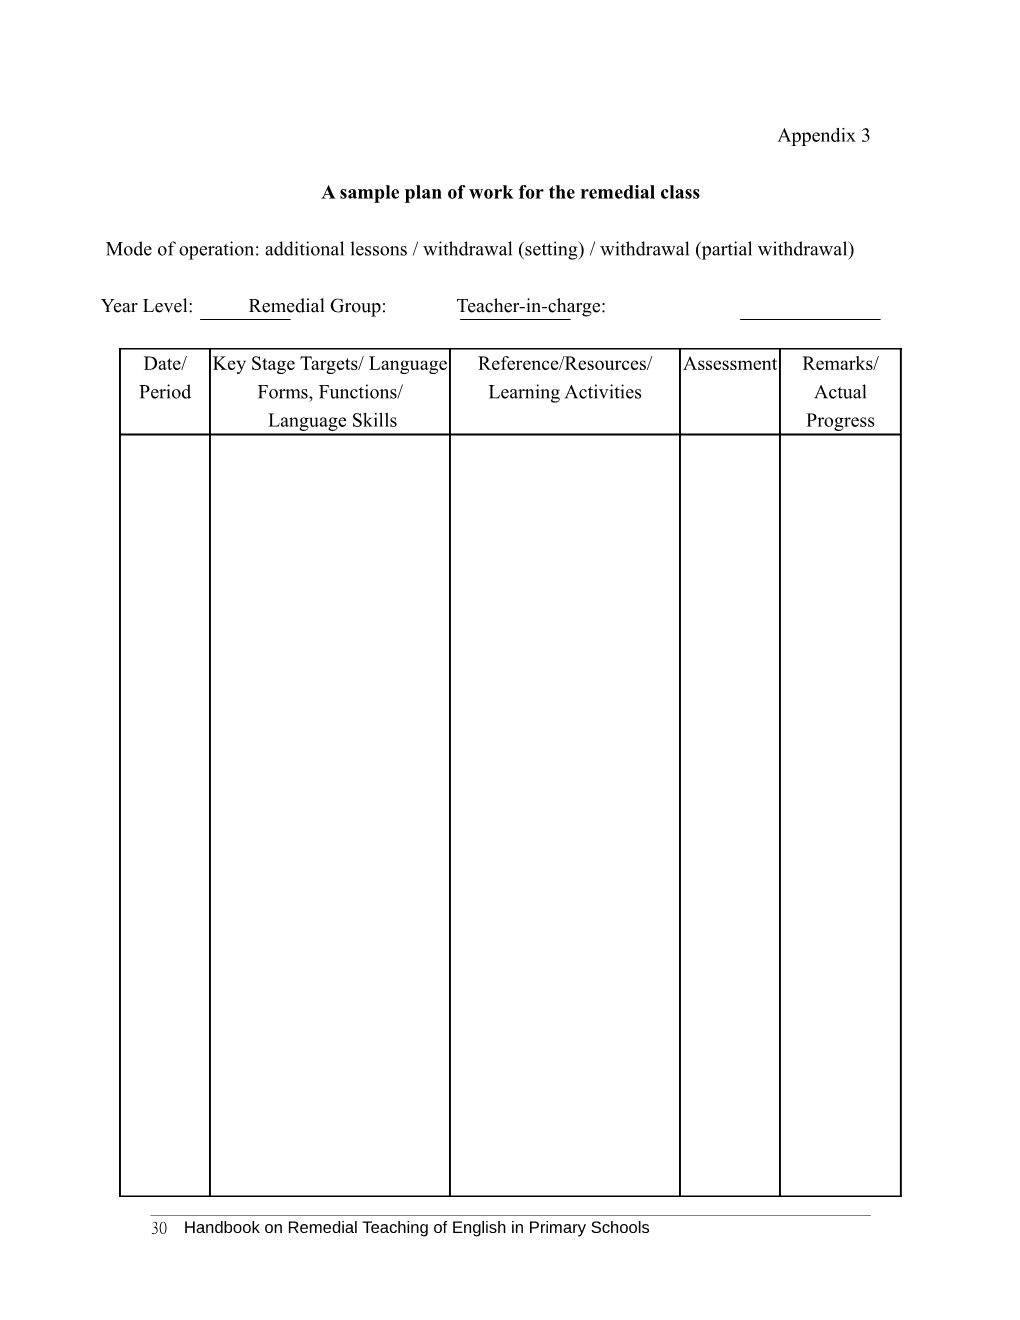 A Sample Plan of Work for the Remedial Class